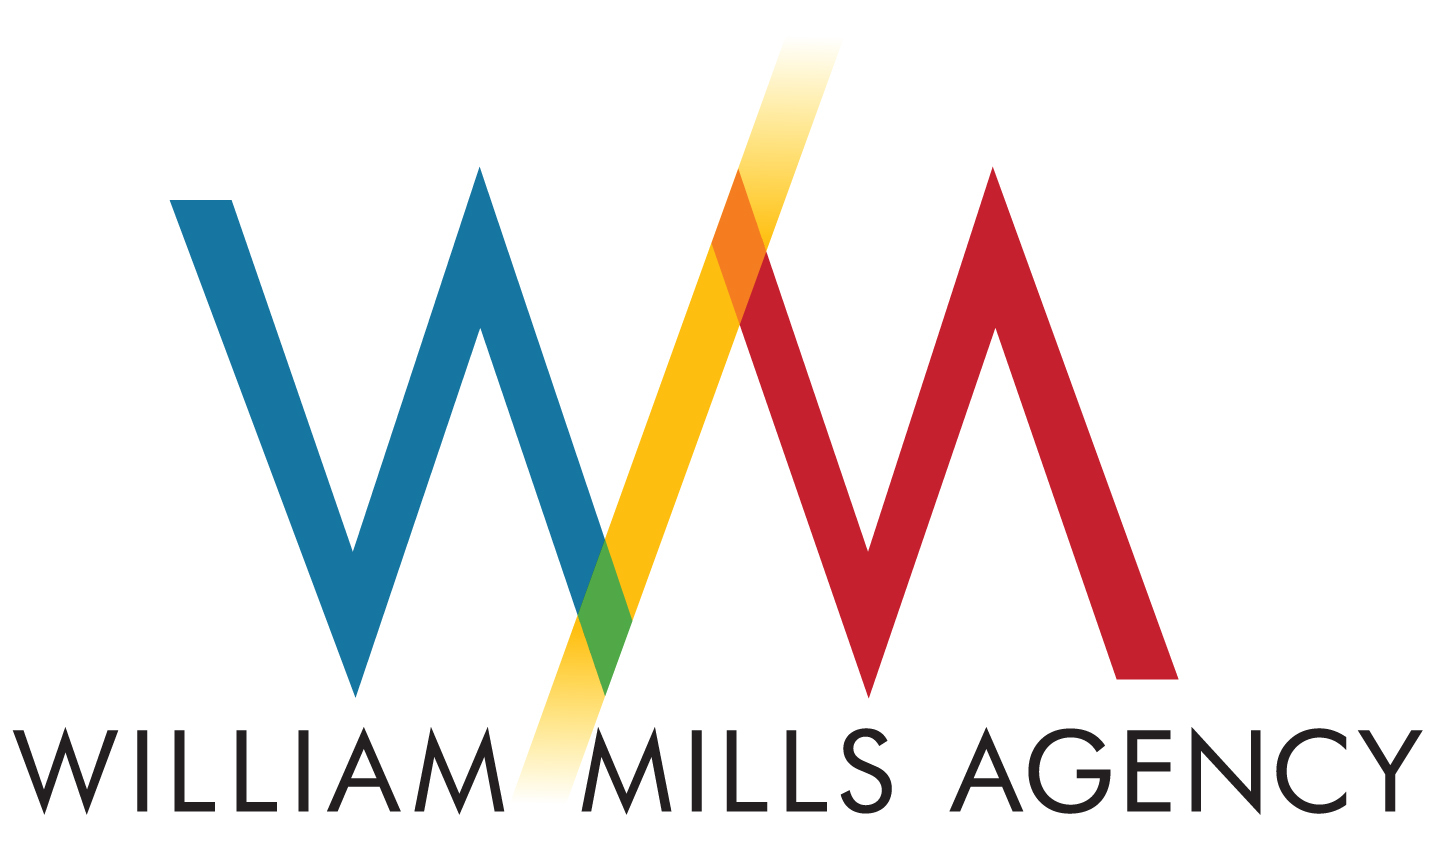 Mbanq Selects William Mills Agency for Public Relations Services thumbnail